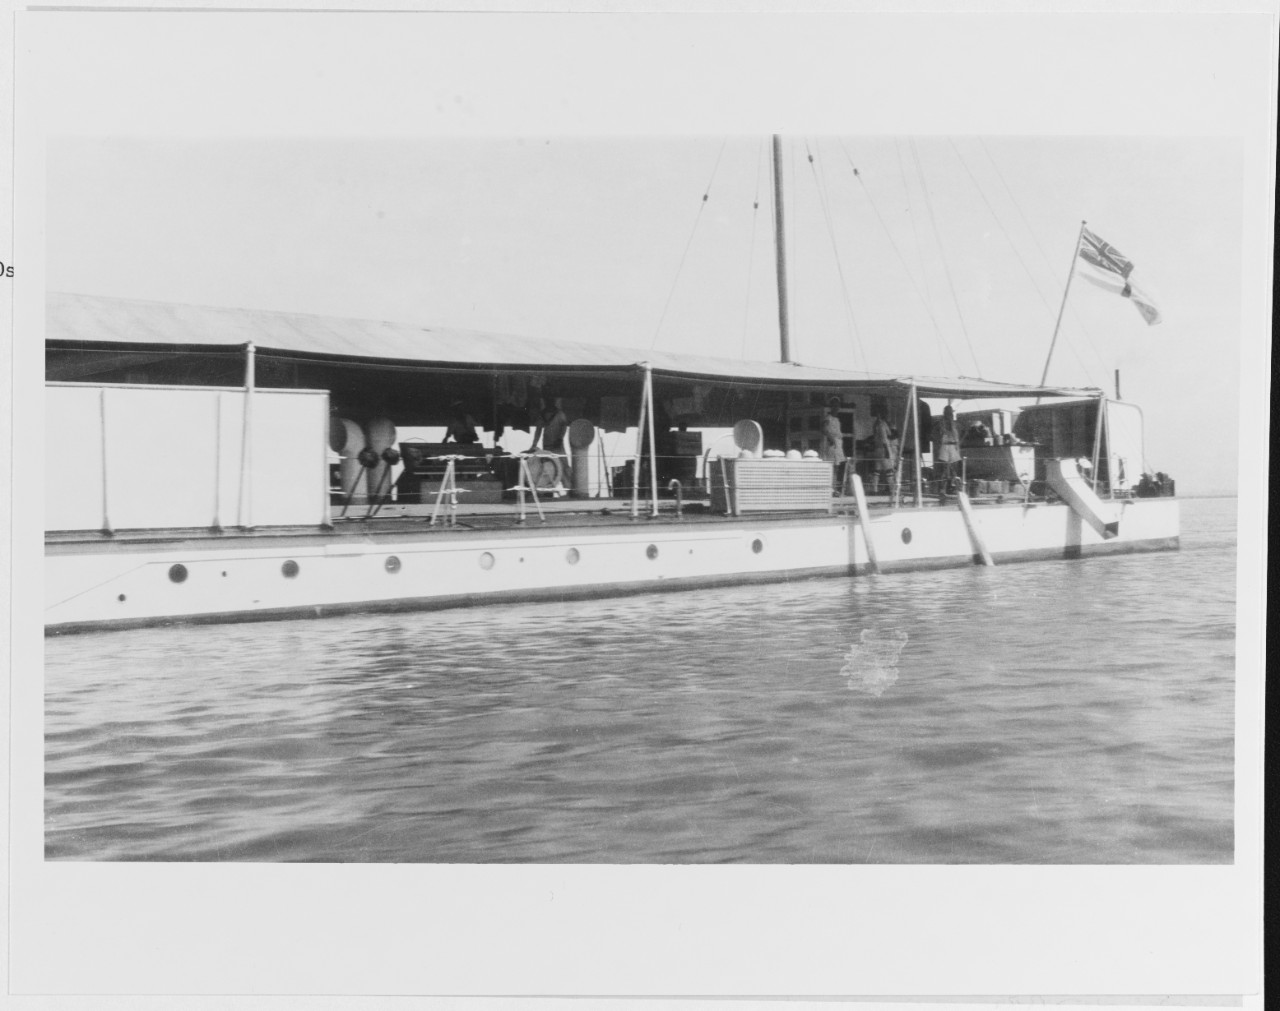 British Insect class gunboat